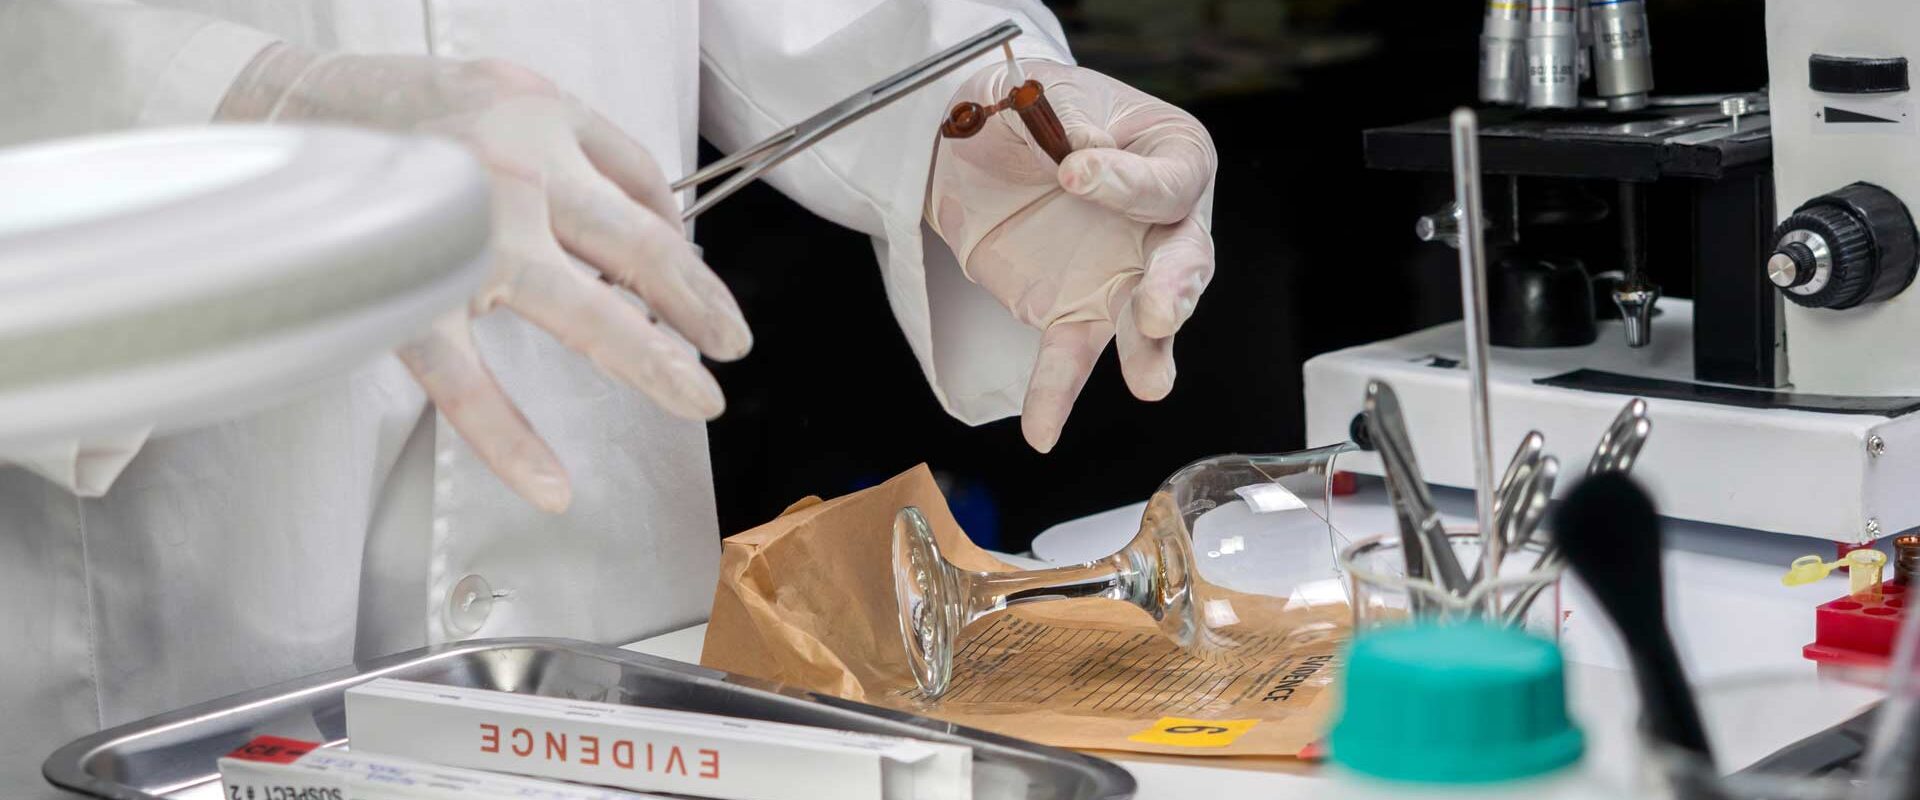 forensics expert works to collect evidence from a wine glass and other items in a lab setting